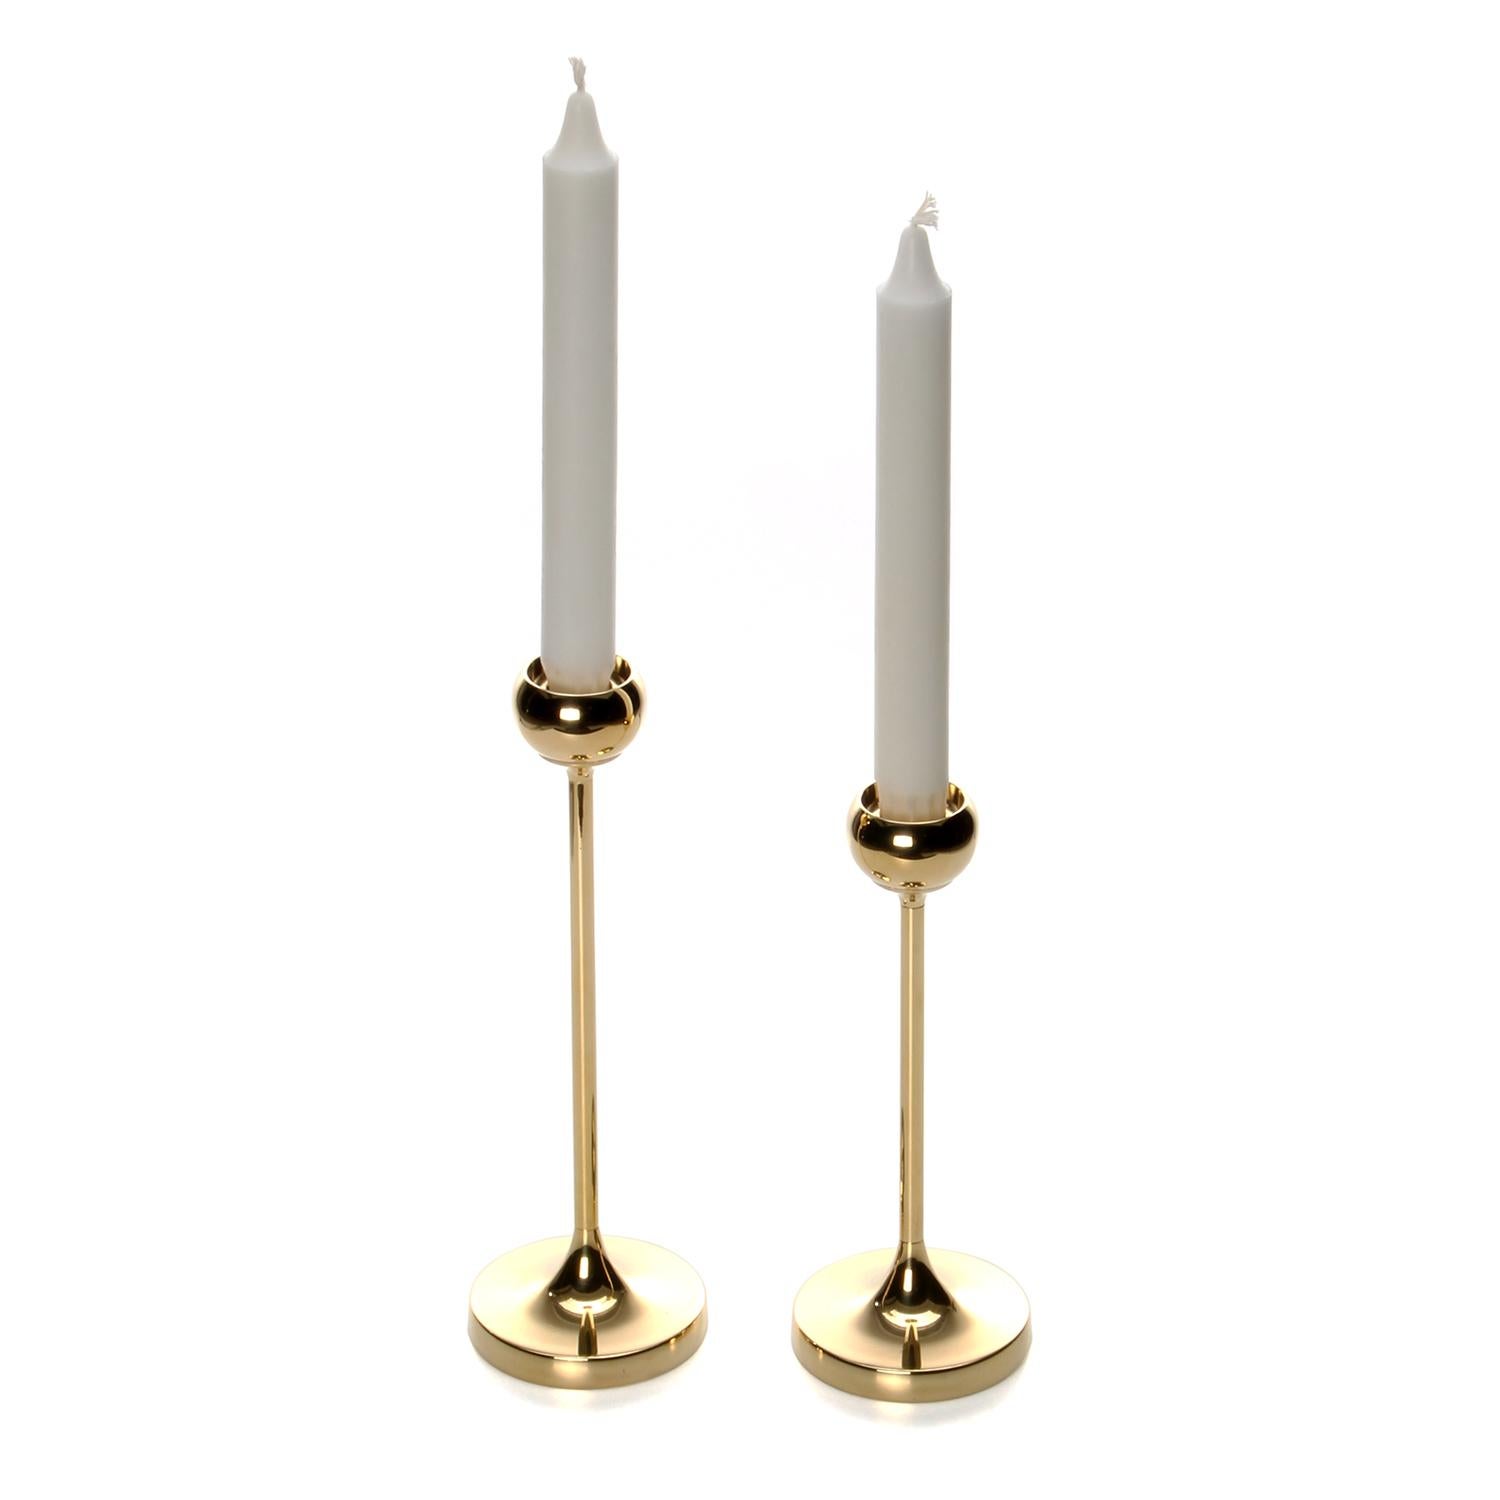 Brass candleholders- set of two 1970s Danish polished brass candlestick holders, all in very good vintage condition.

An elegant set of brass candlestick holders, each comprised of a round base from where a thin brass stick emerges, ending in a